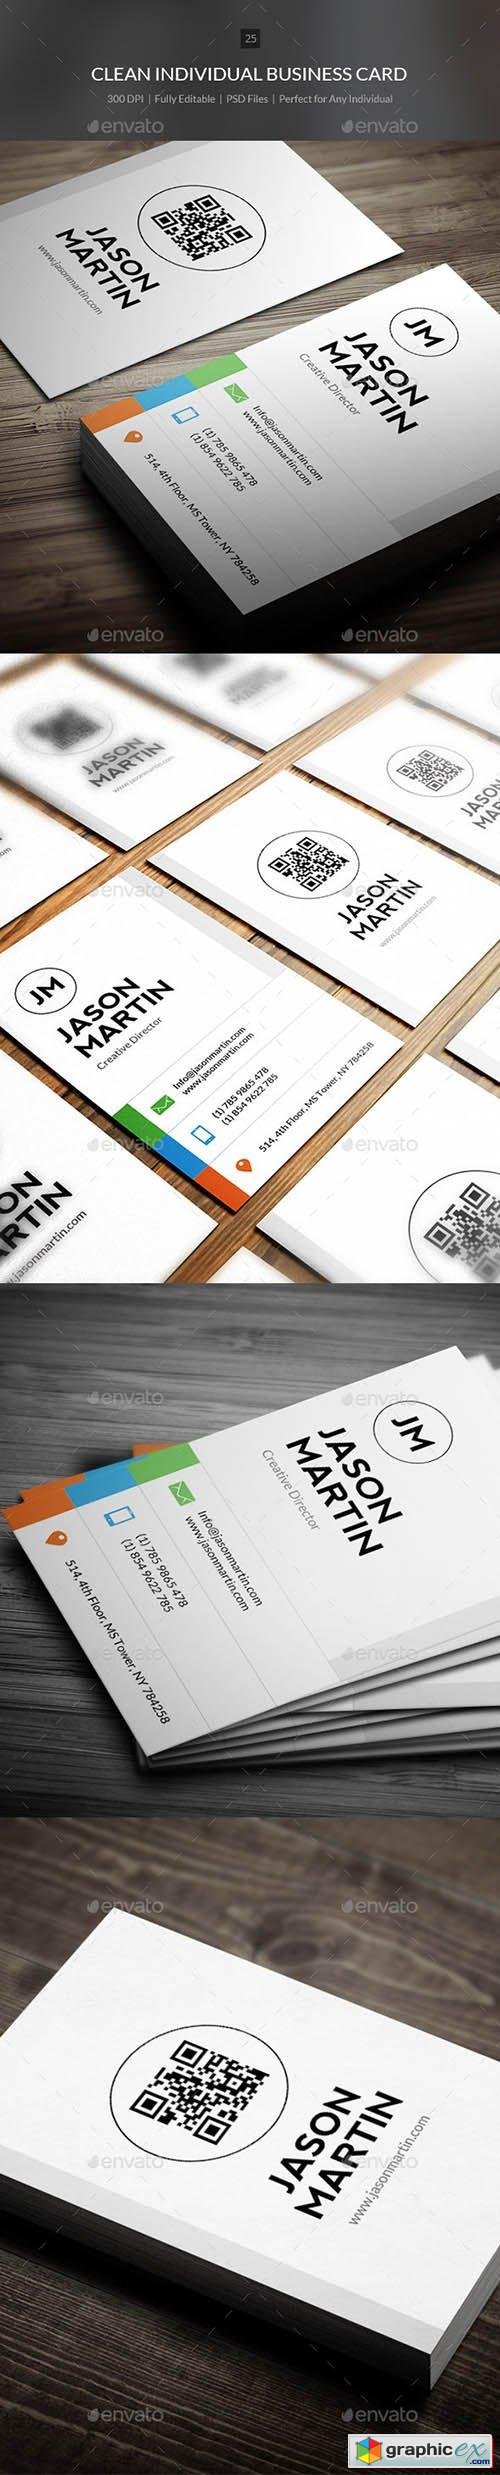 Clean Individual Business Card - 25